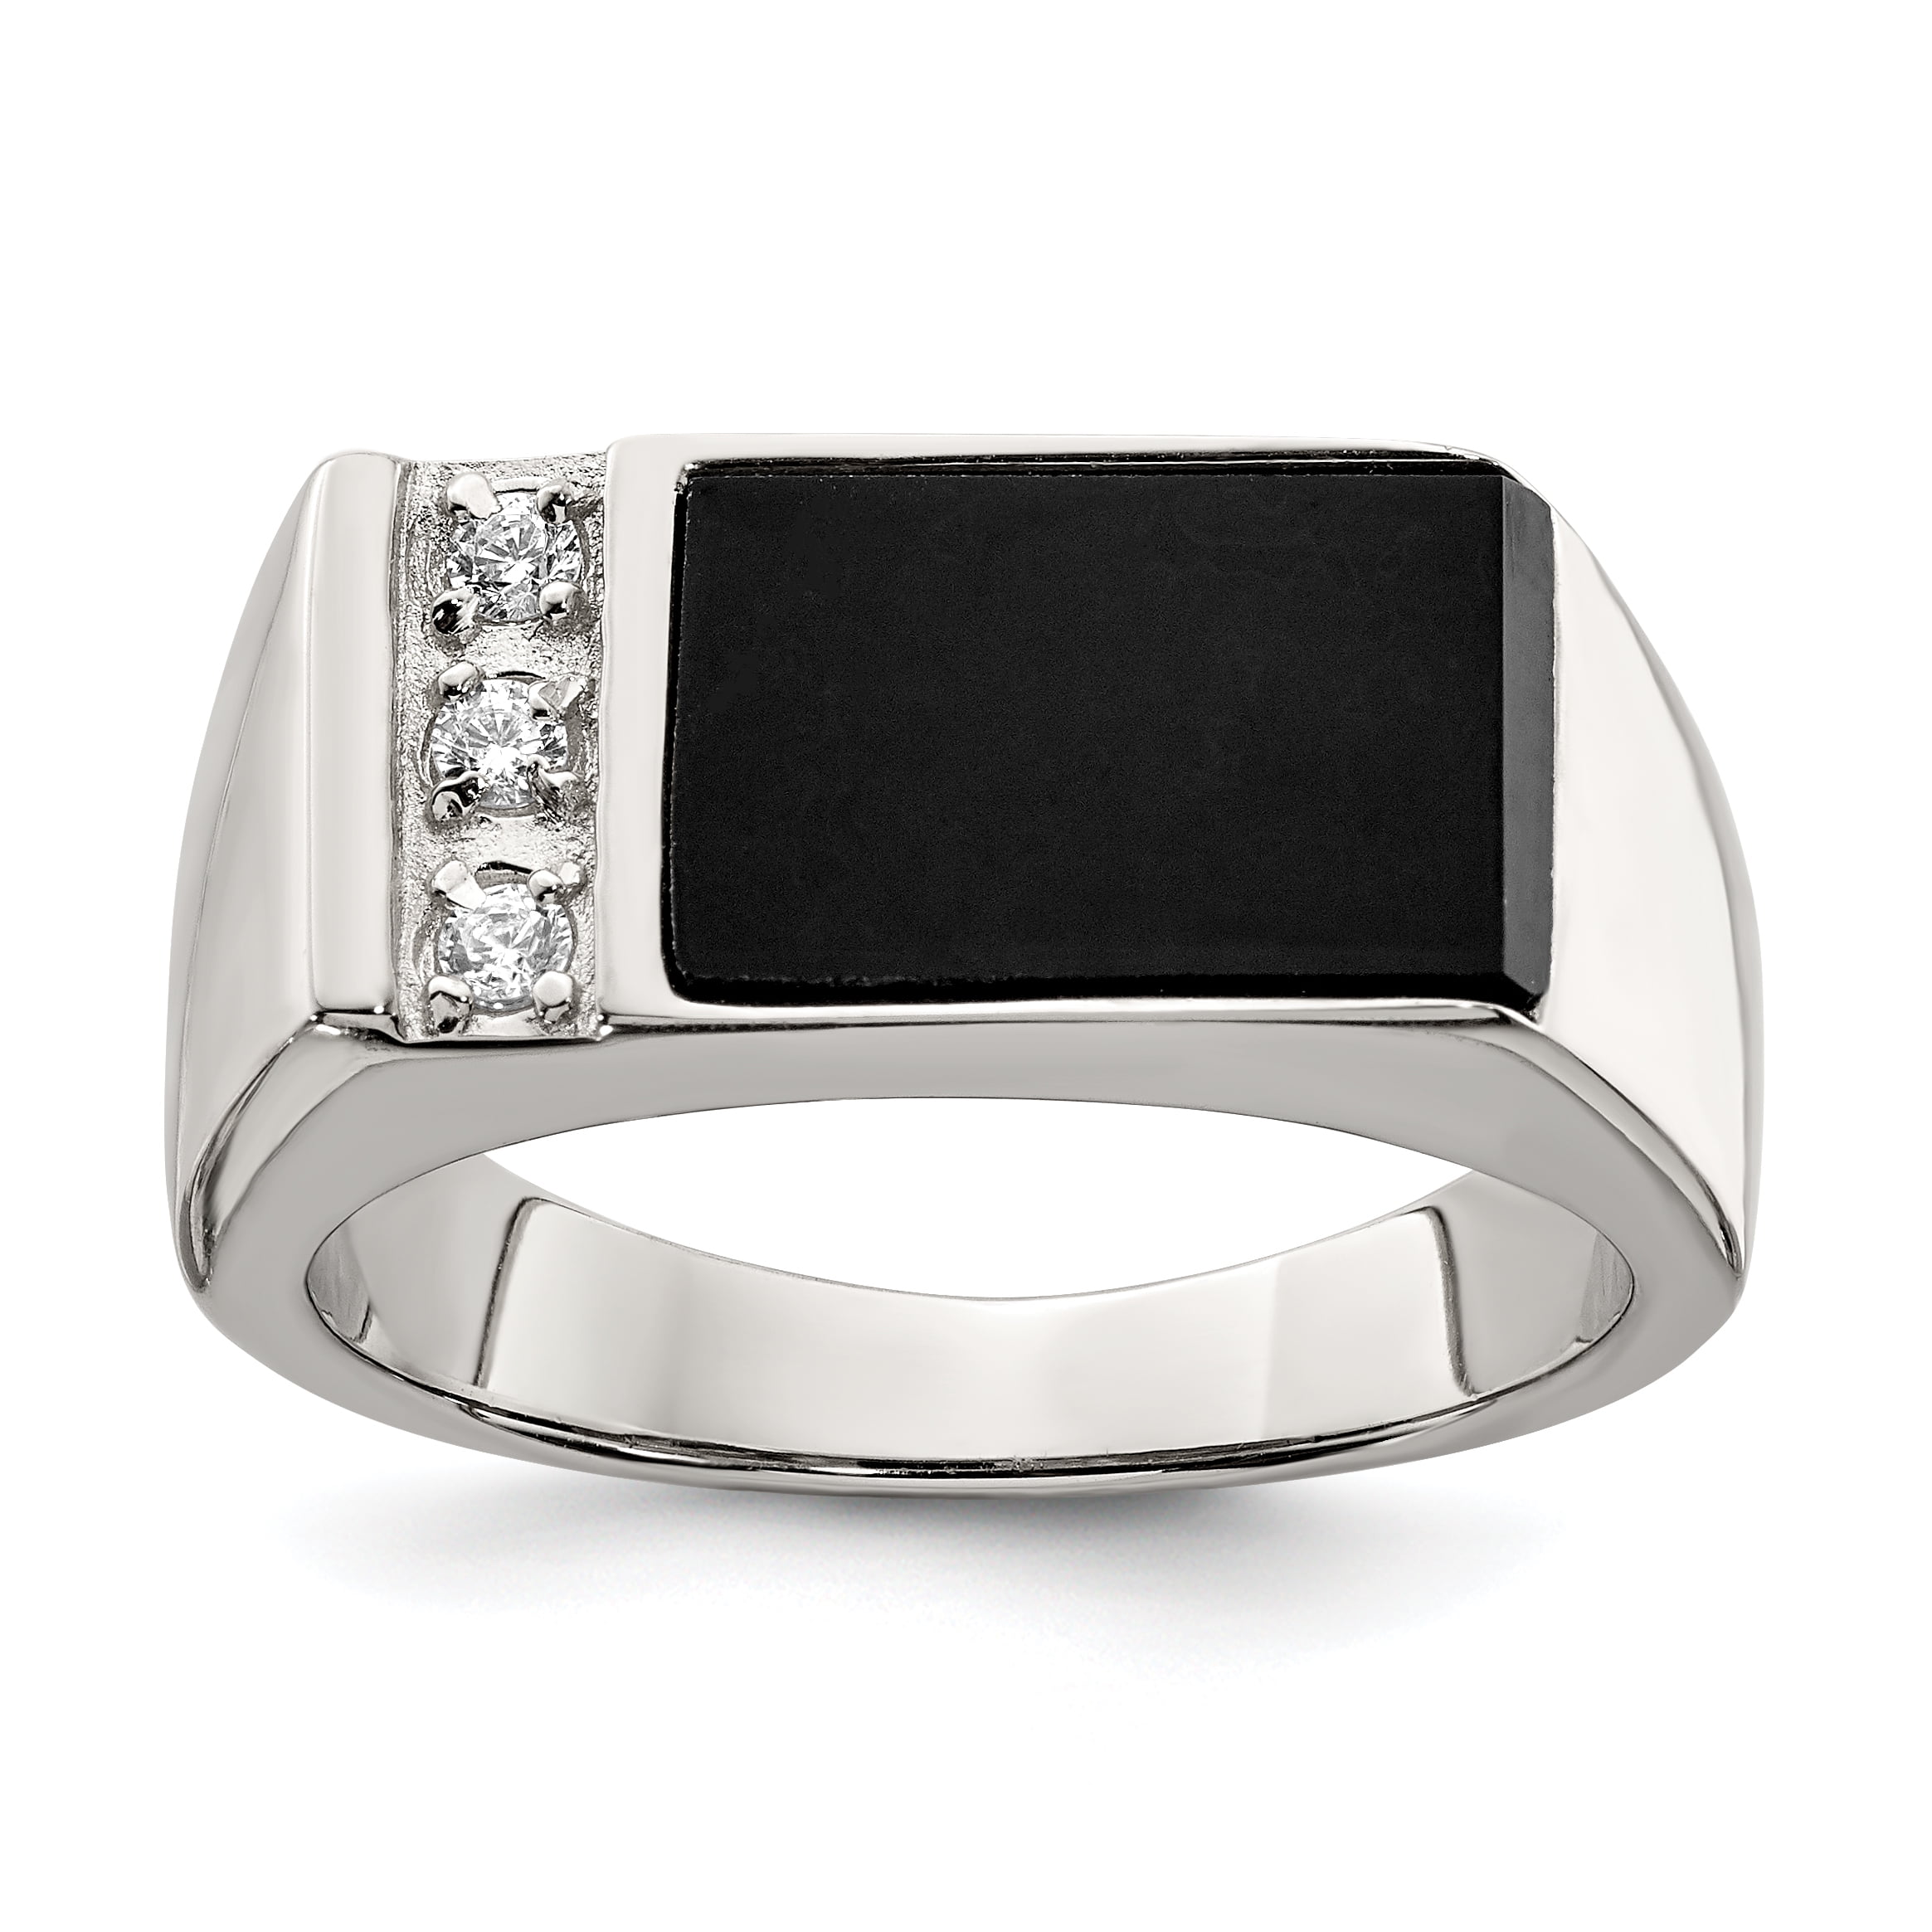 925 Sterling Silver Onyx and Cubic Zirconia Men's Ring | Walmart Canada